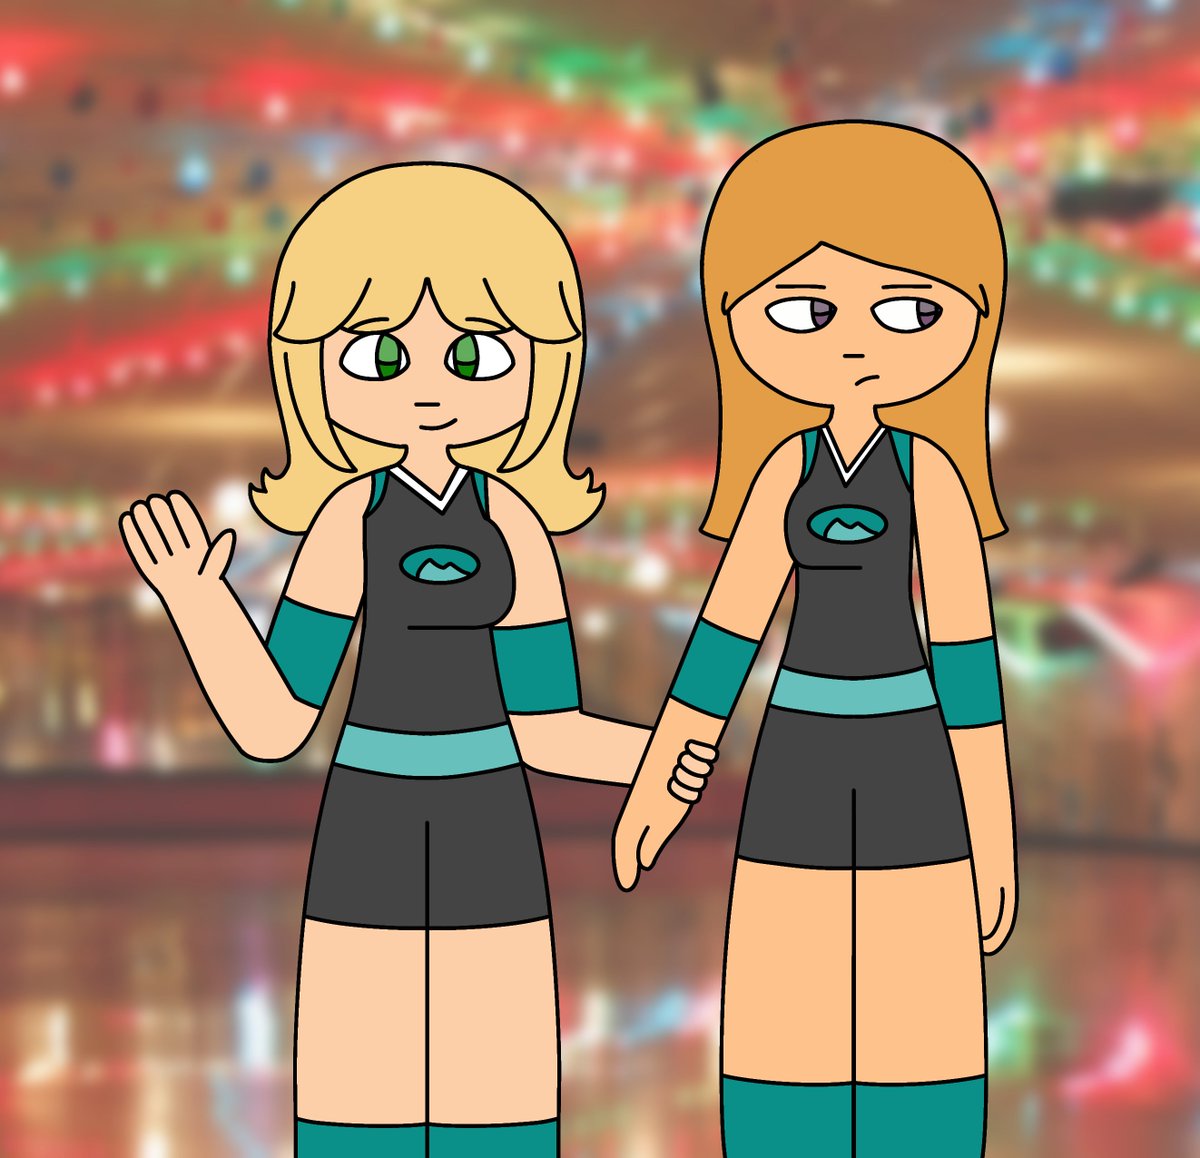 I realized the line art had some slight errors I didn't notice before
So I had to edit it to fix it, the hair lines weren't connecting where they needed to be
Have rollerderby Ally and Julia again!